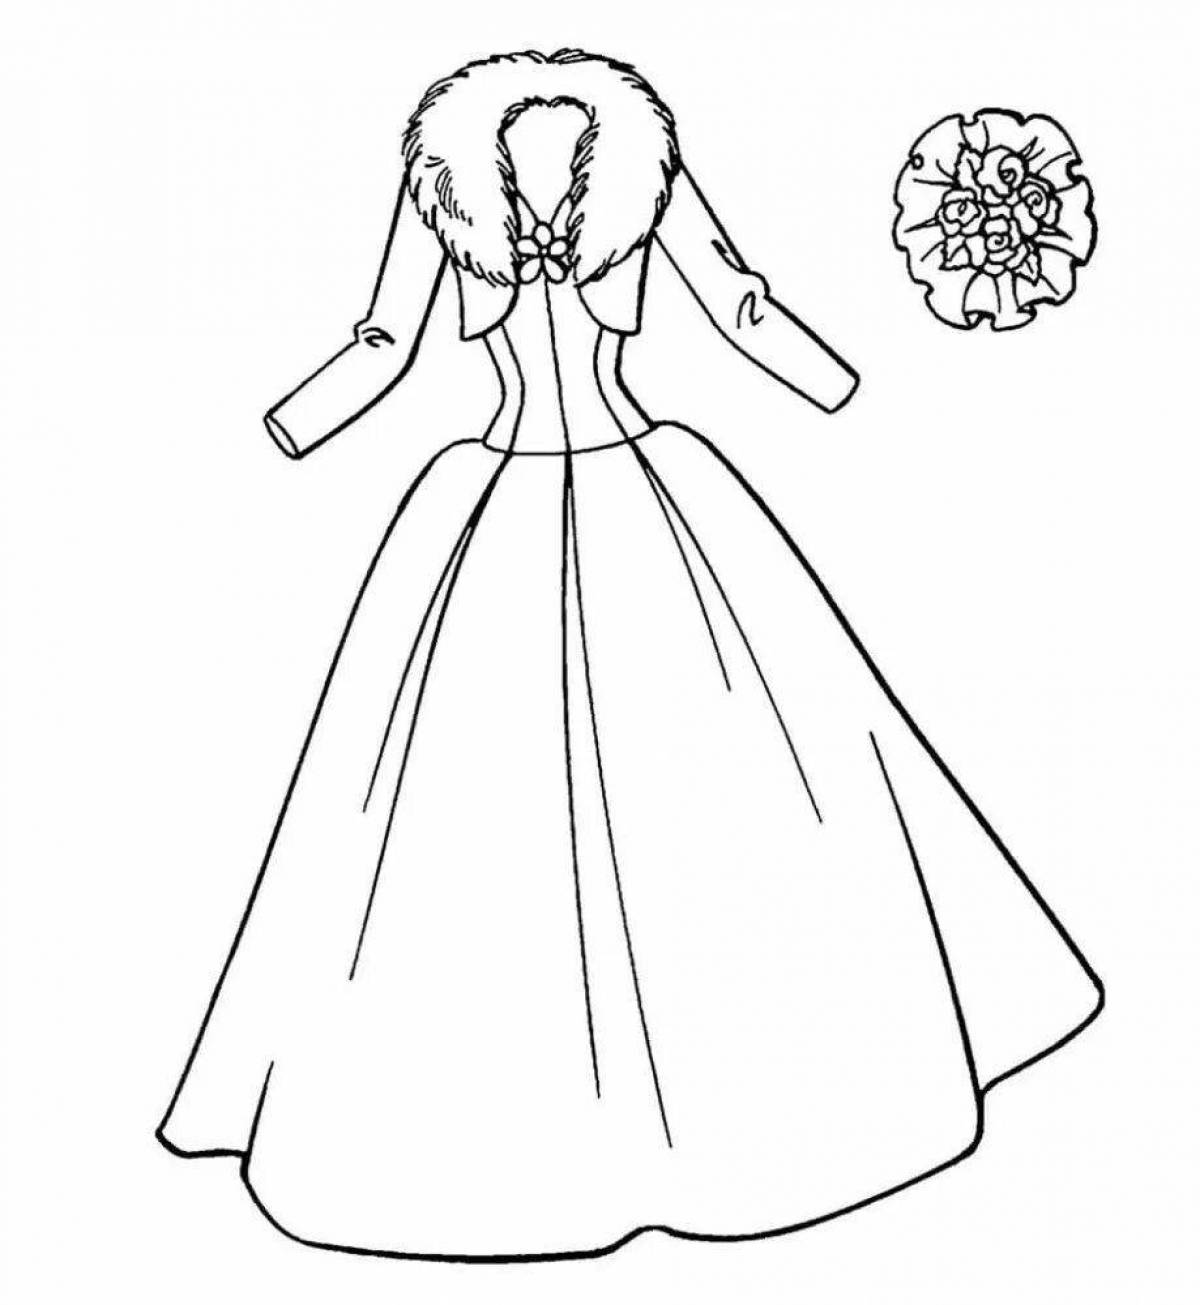 Delightful puffy dress coloring book